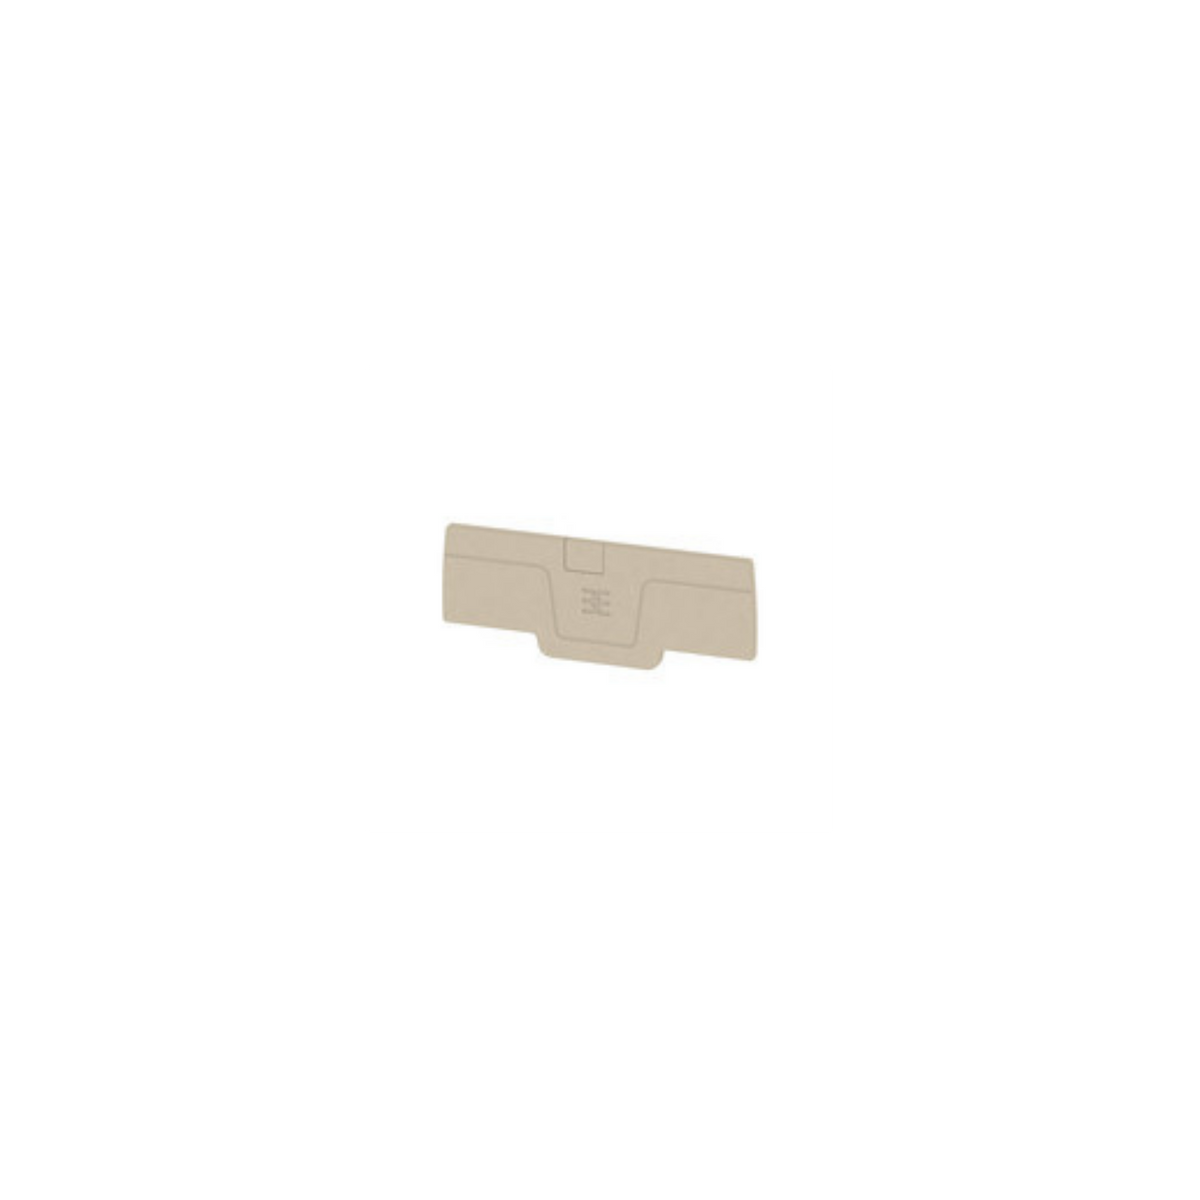 beige, rectangular plate with a tab on the bottom in the center